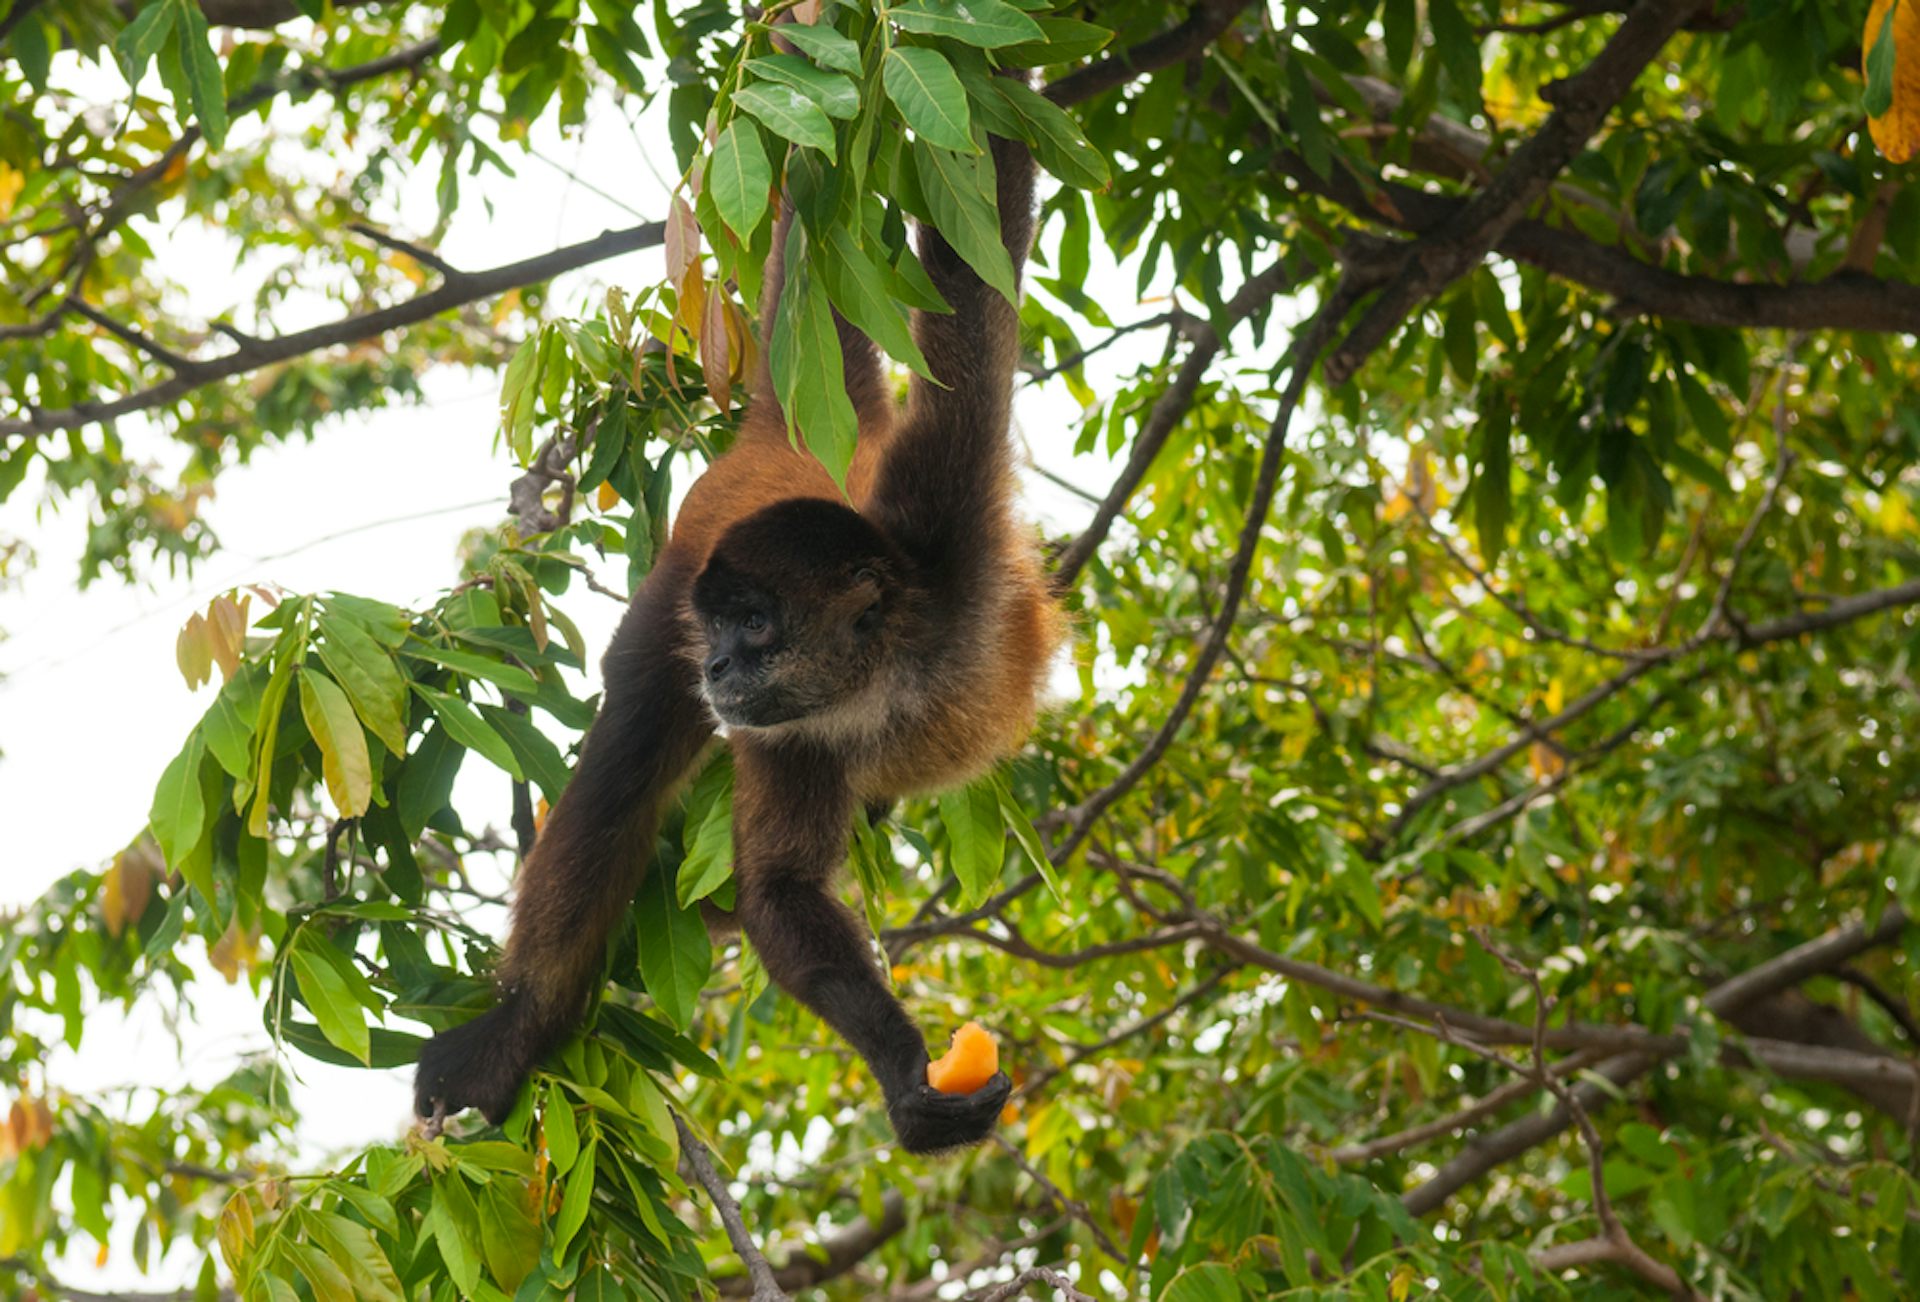 New Study Challenges the Notion: Primate Brain Size Not Driven by Food Search